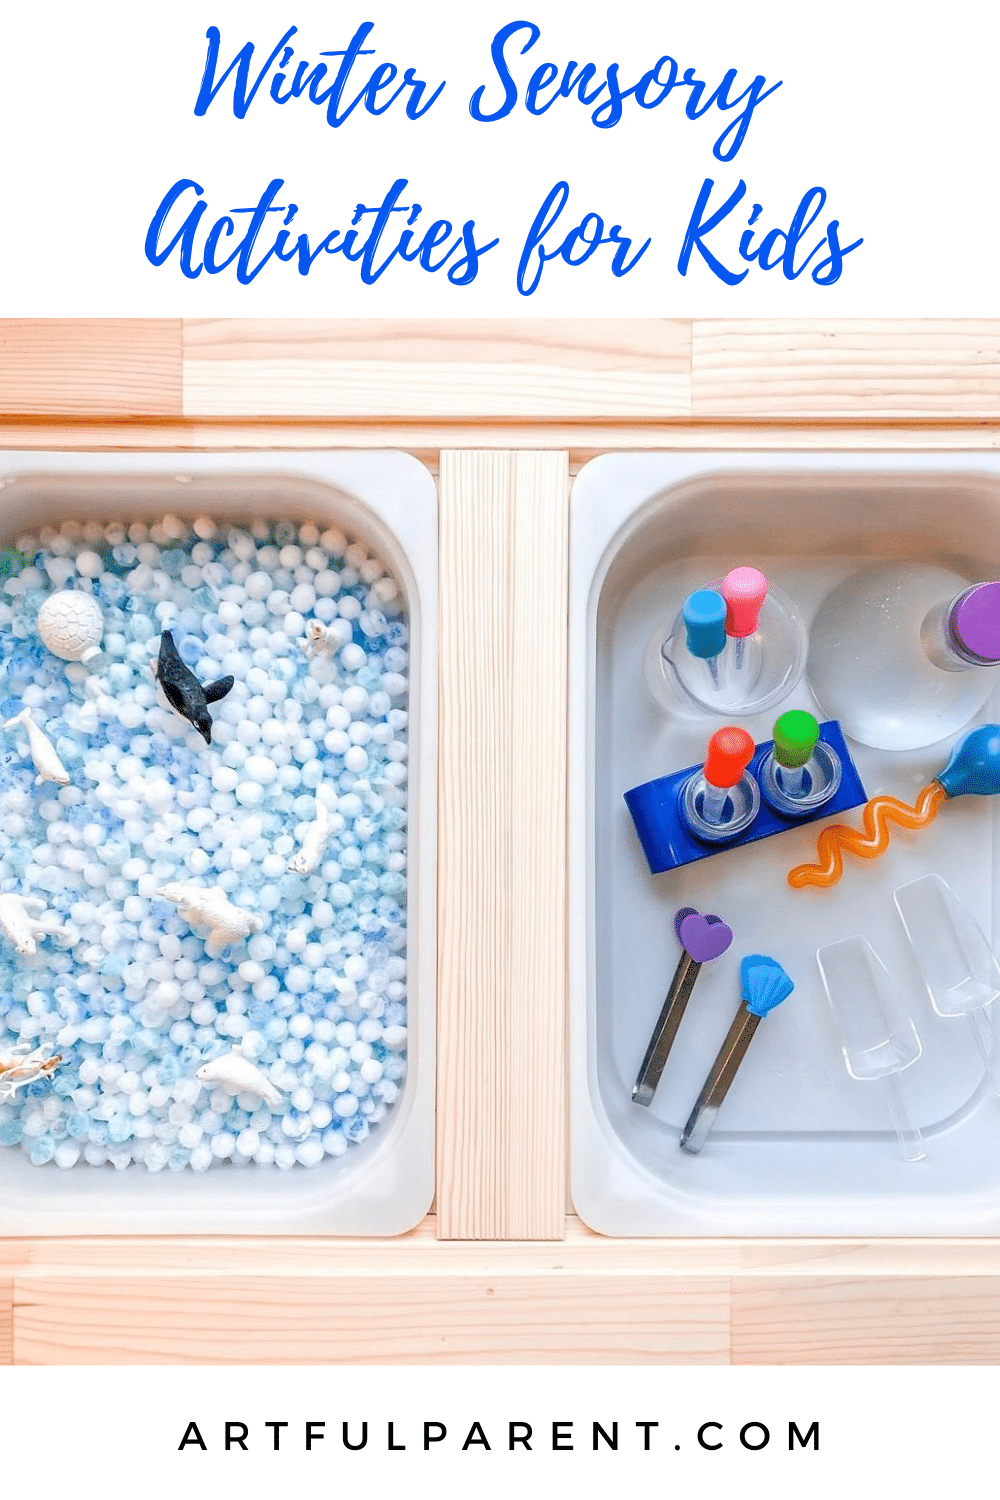 12 Winter Sensory Activities and Creative Play Ideas for Kids